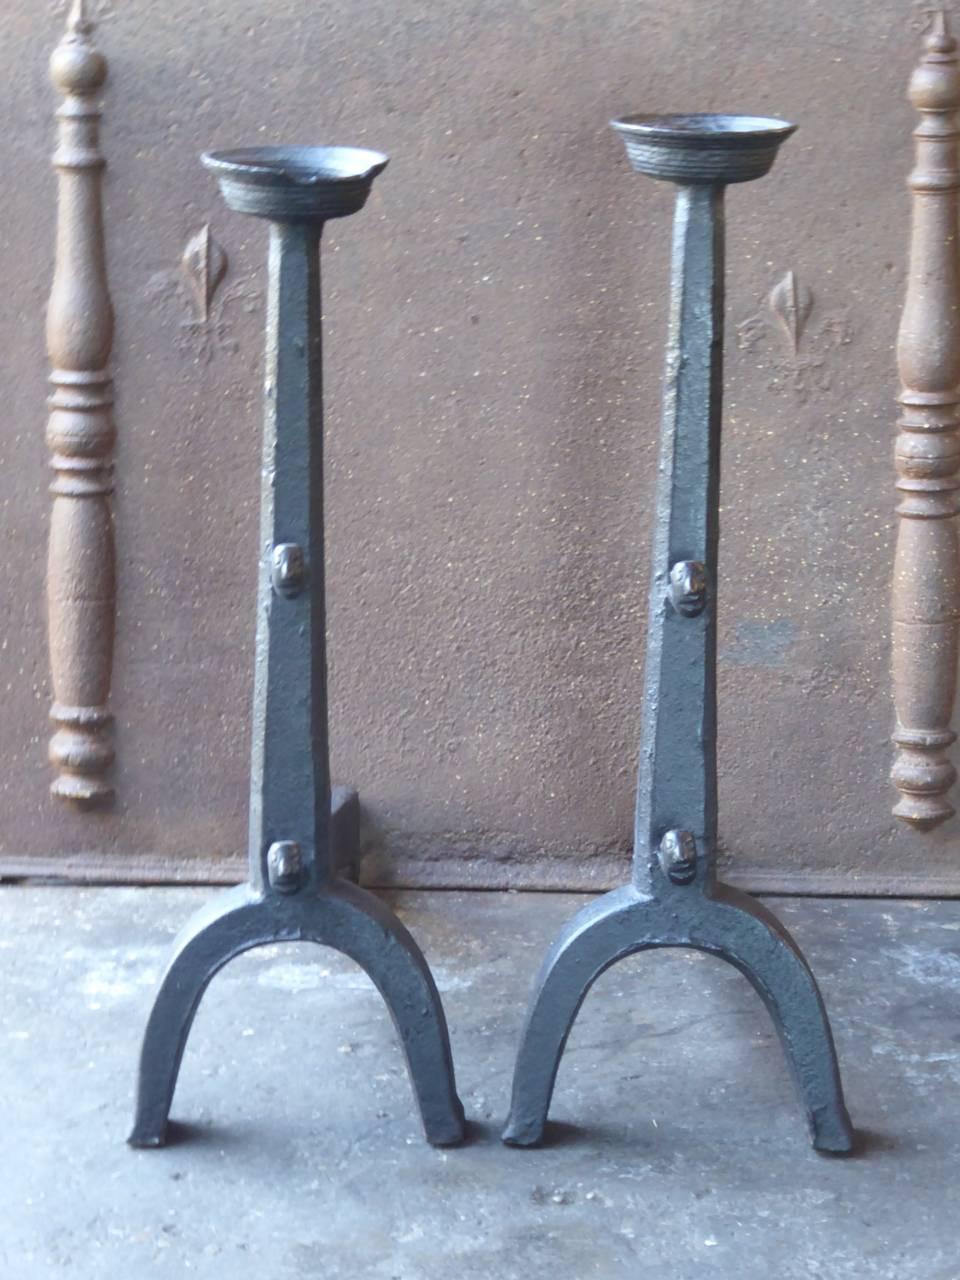 16th century French Gothic andirons made of cast iron. With faces on the spit hooks to discourage evil powers.

This product has to be shipped as freight due to its size and/or (volumetric) weight. You can contact us to find out the daily rate for a